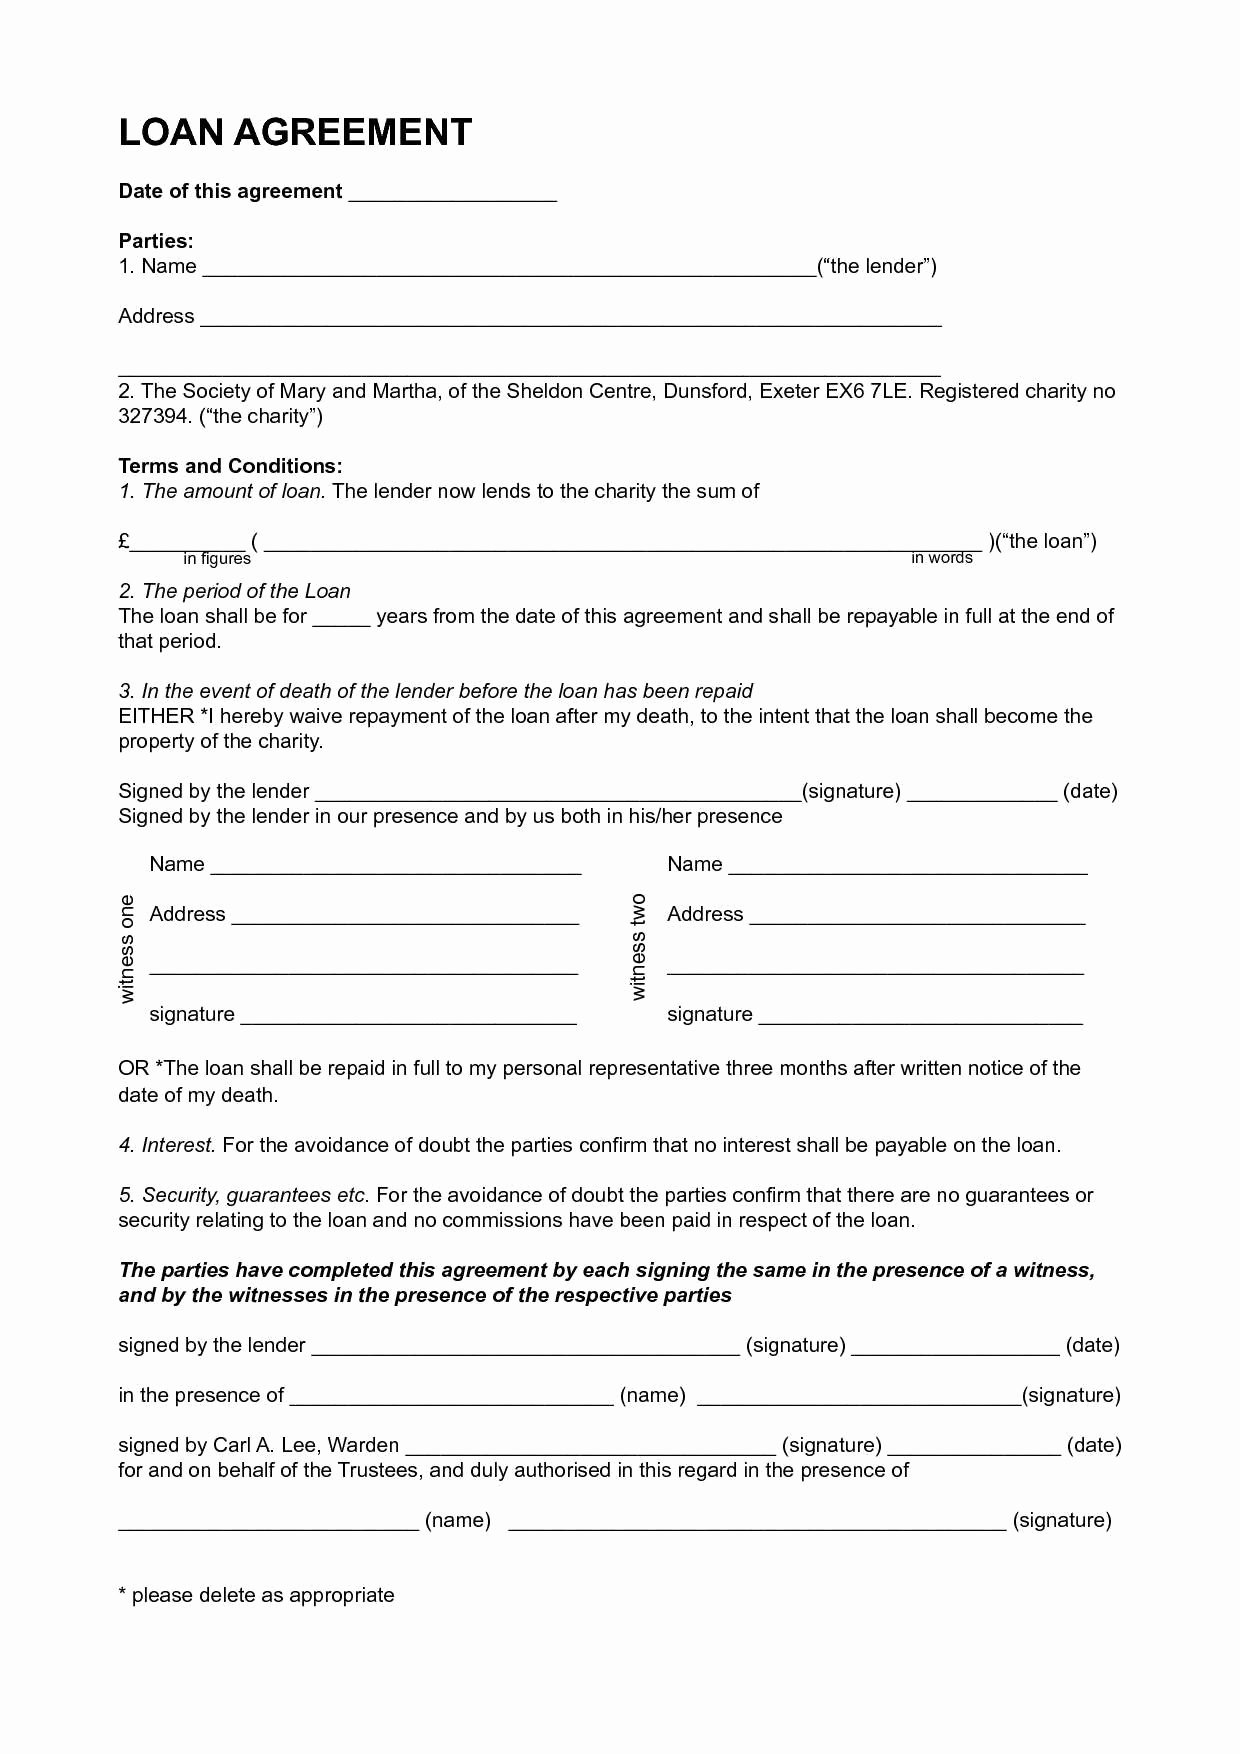 Car Accident Agreement Letter Between Two Parties New Agreement Letter Sample Pdf Regular Personal Loan Contract